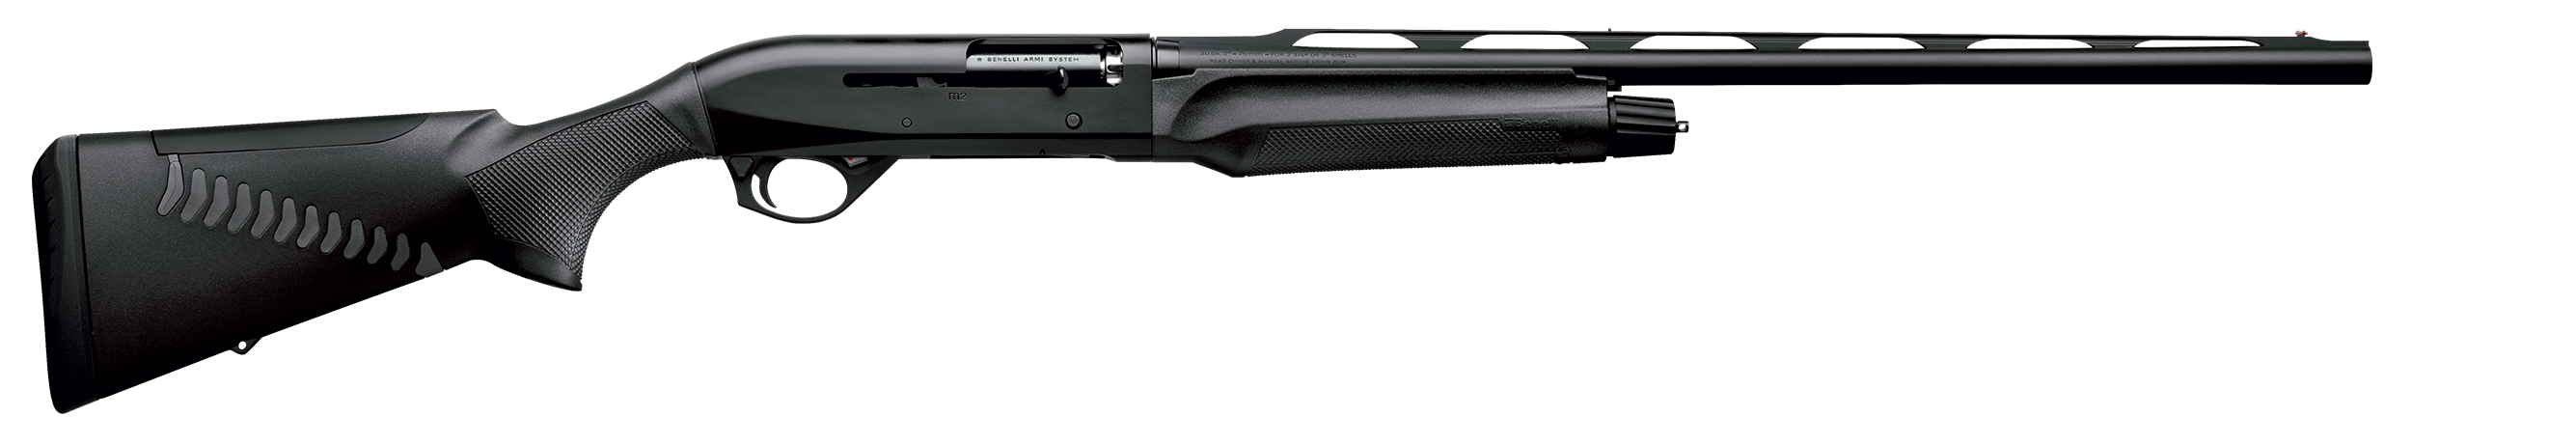 benelli-m2-comfortech-20.png